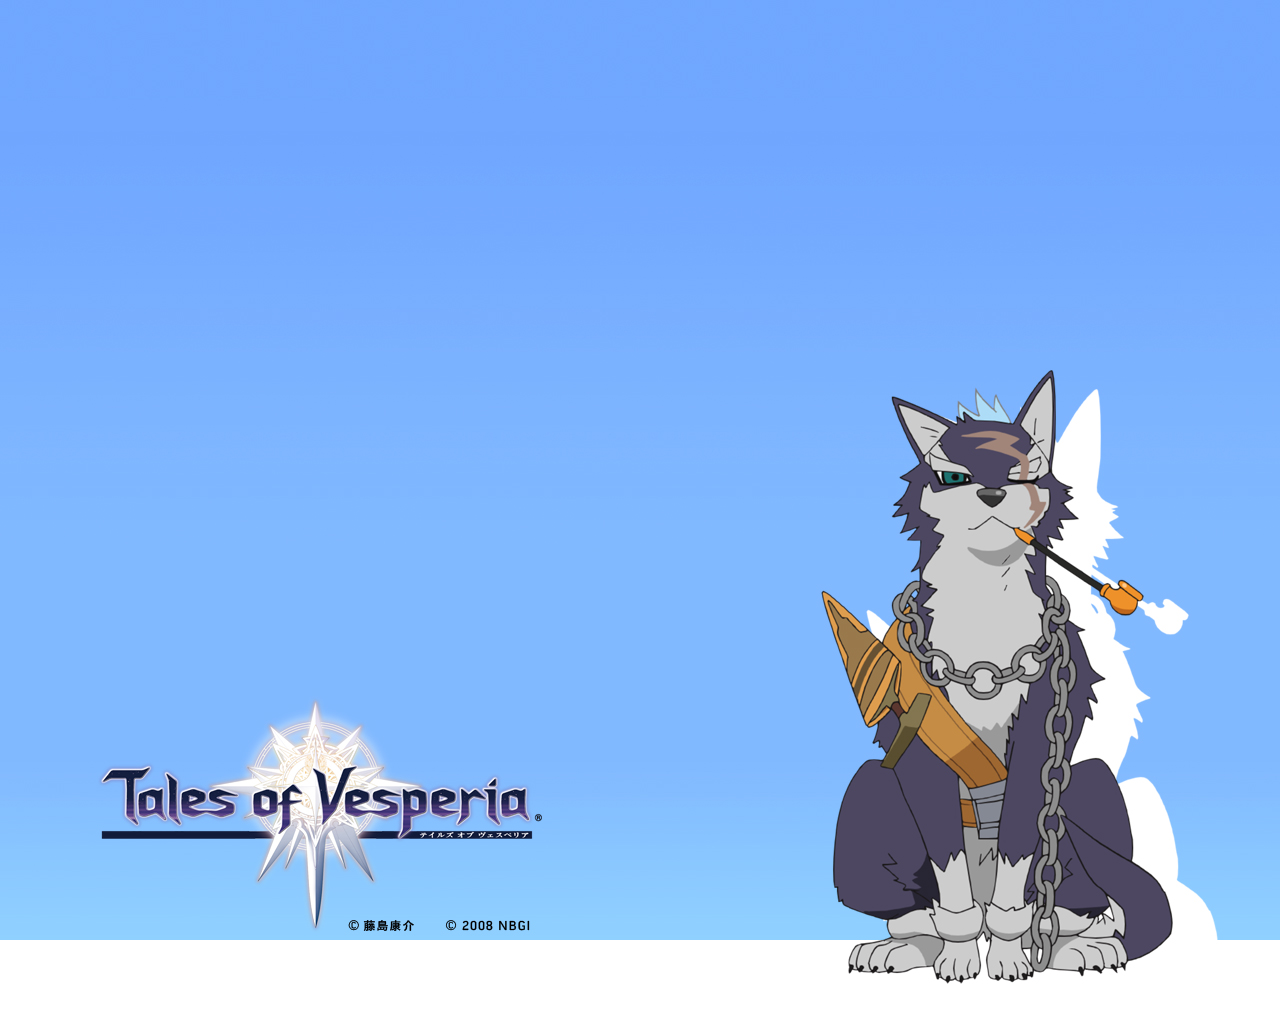 Repede 1280x1024
Repede wallpaper from the ToV survey. 1280x1024
